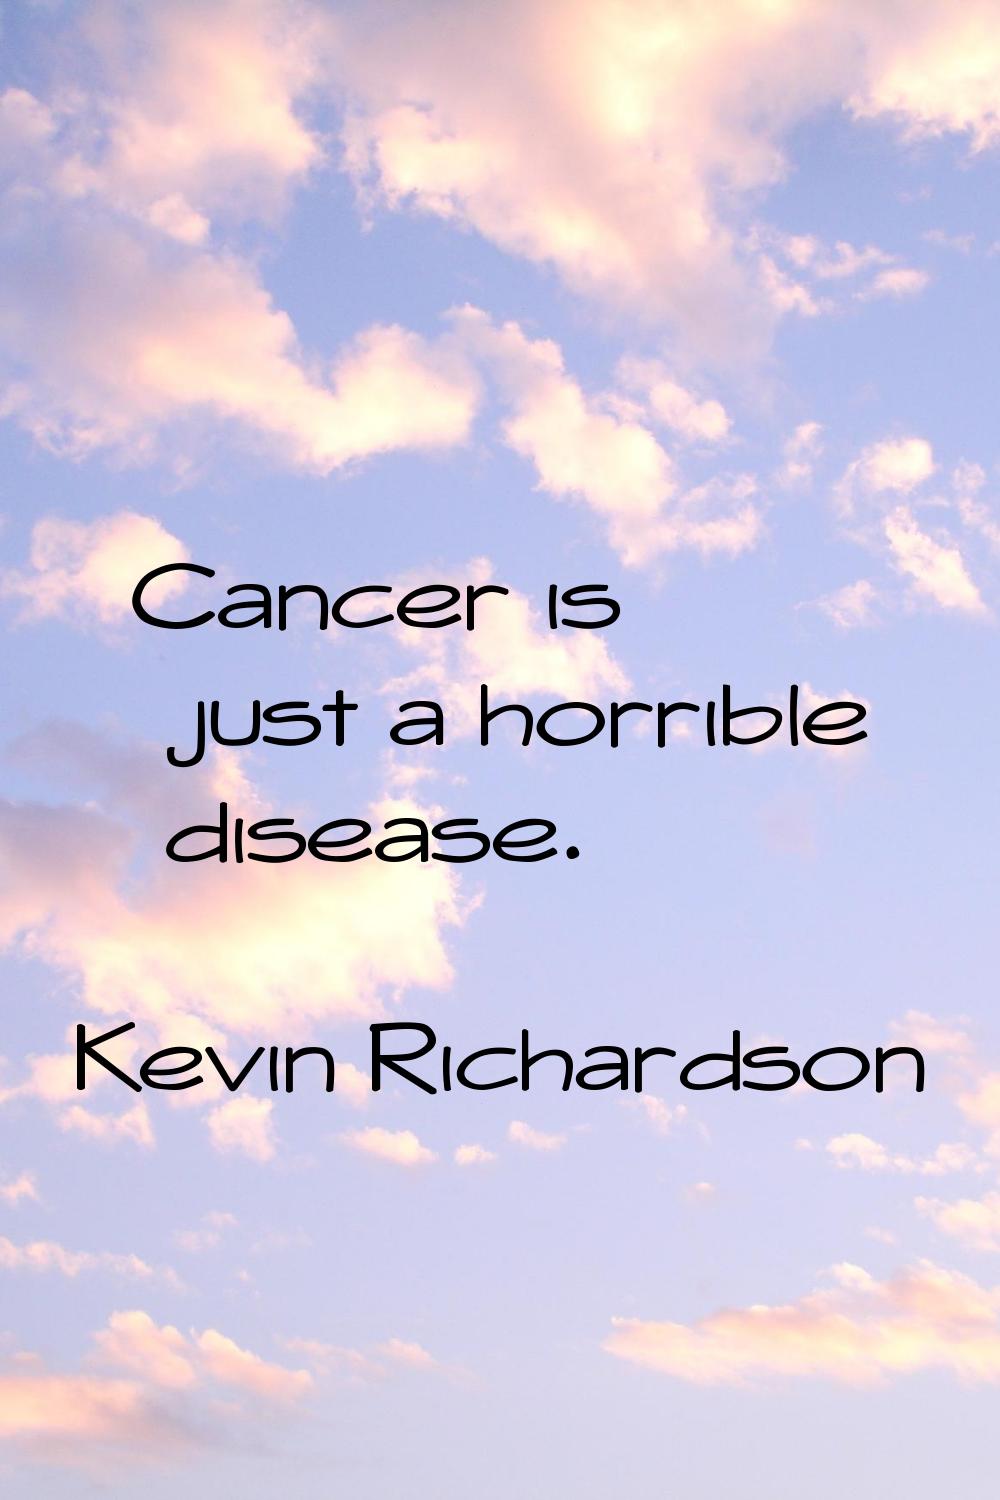 Cancer is just a horrible disease.